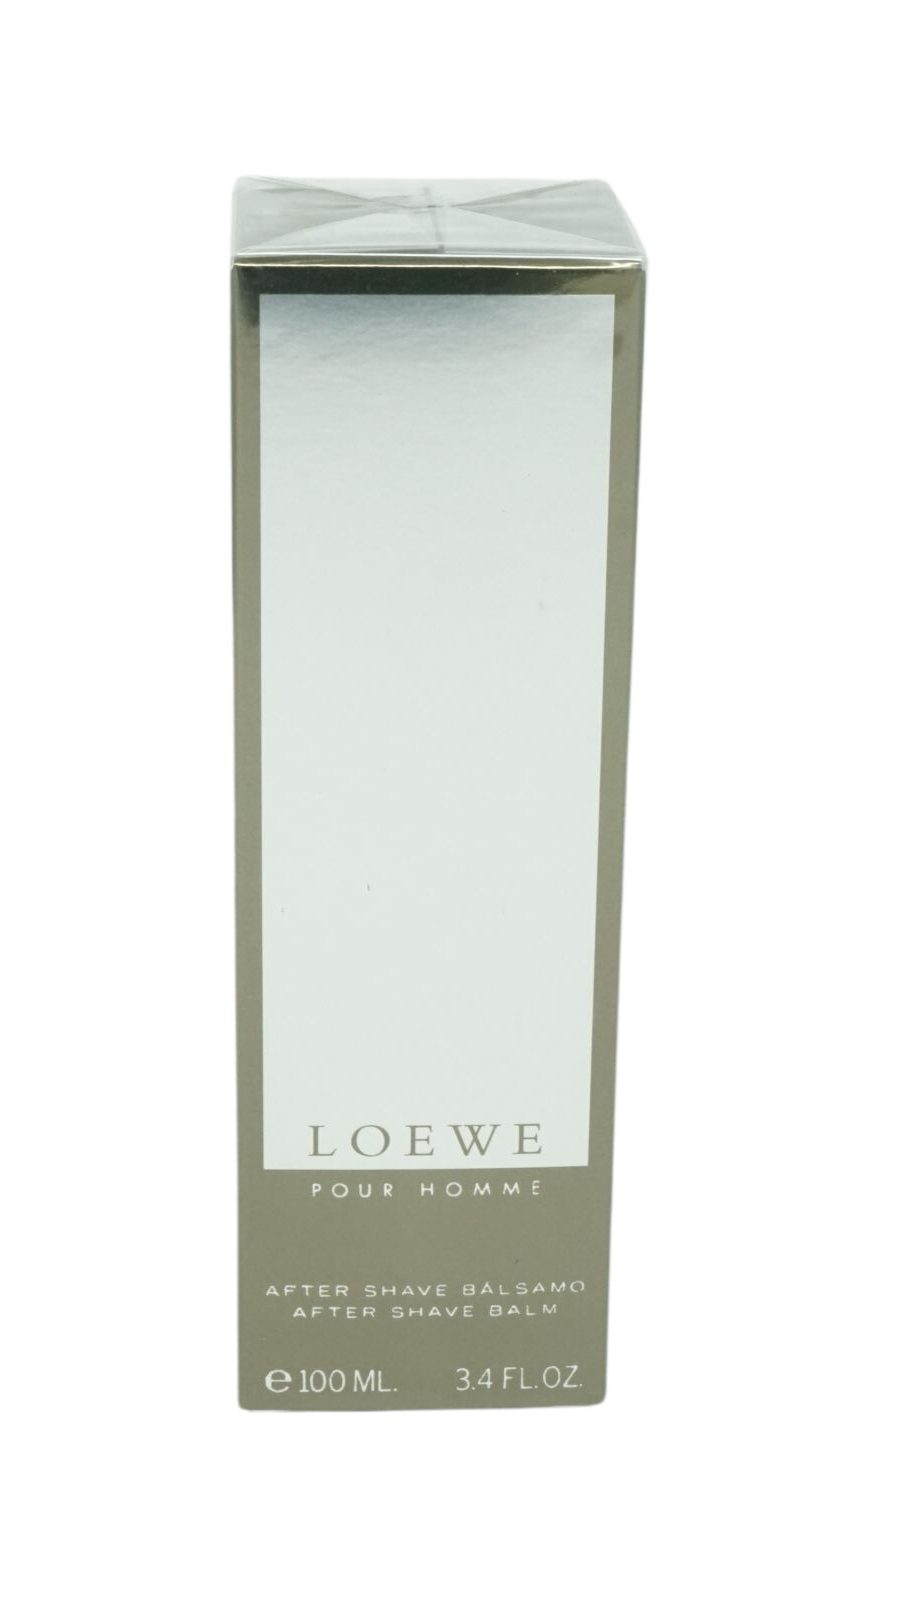 Loewe After-Shave Balsam Pour Shave Loewe After Homme 100ml Balm